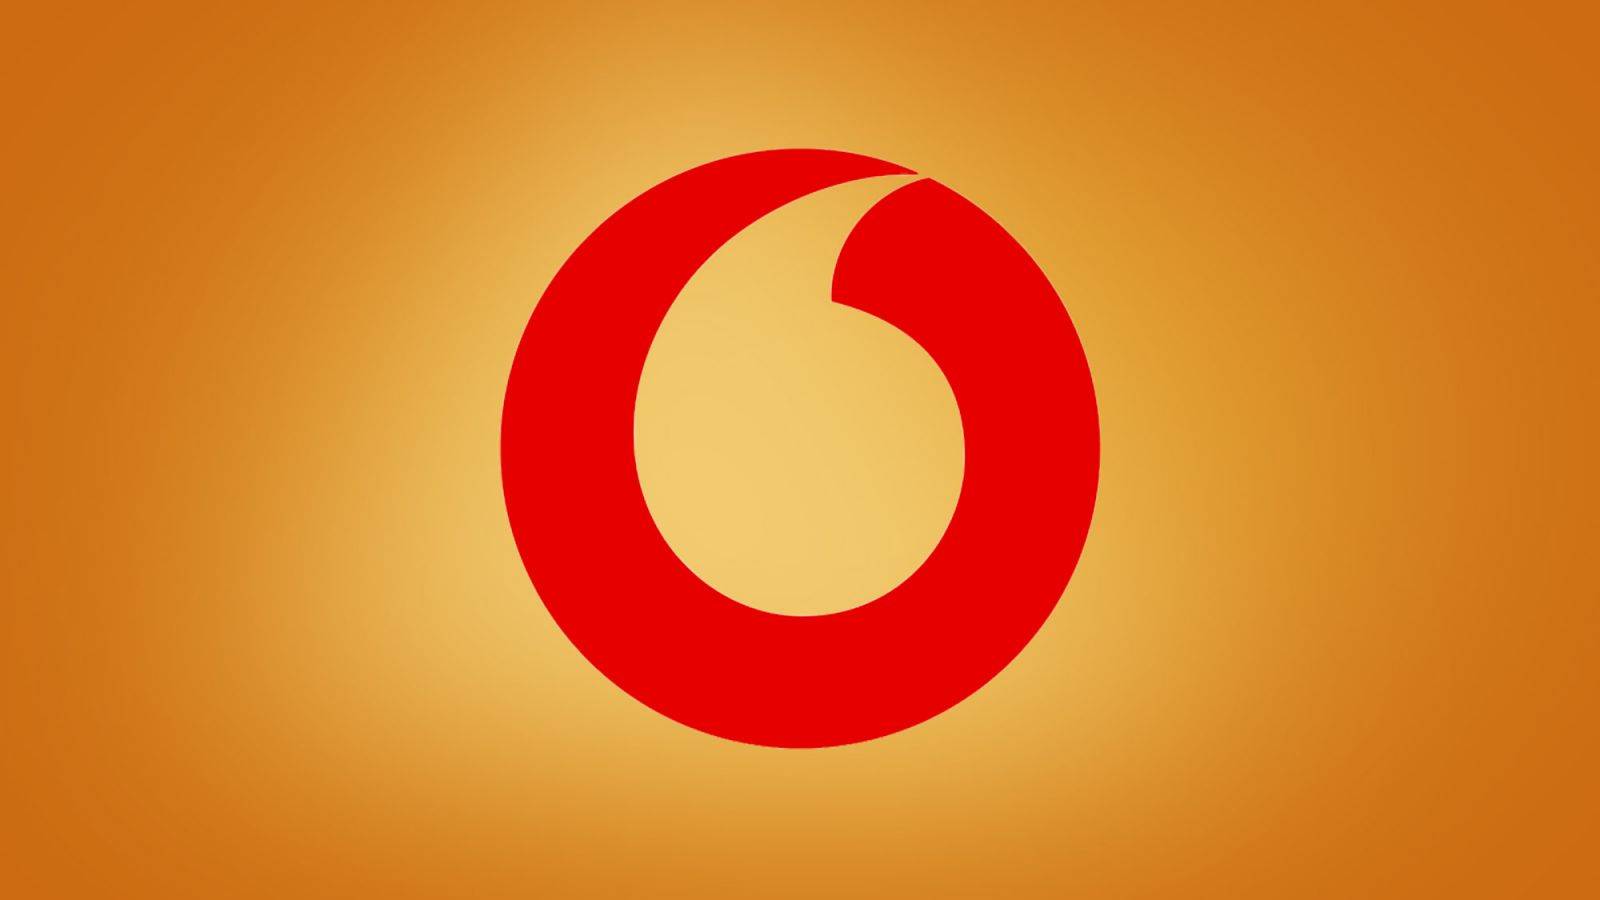 Vodafone. The Online Store has new Good Discounts for Phones on August 8